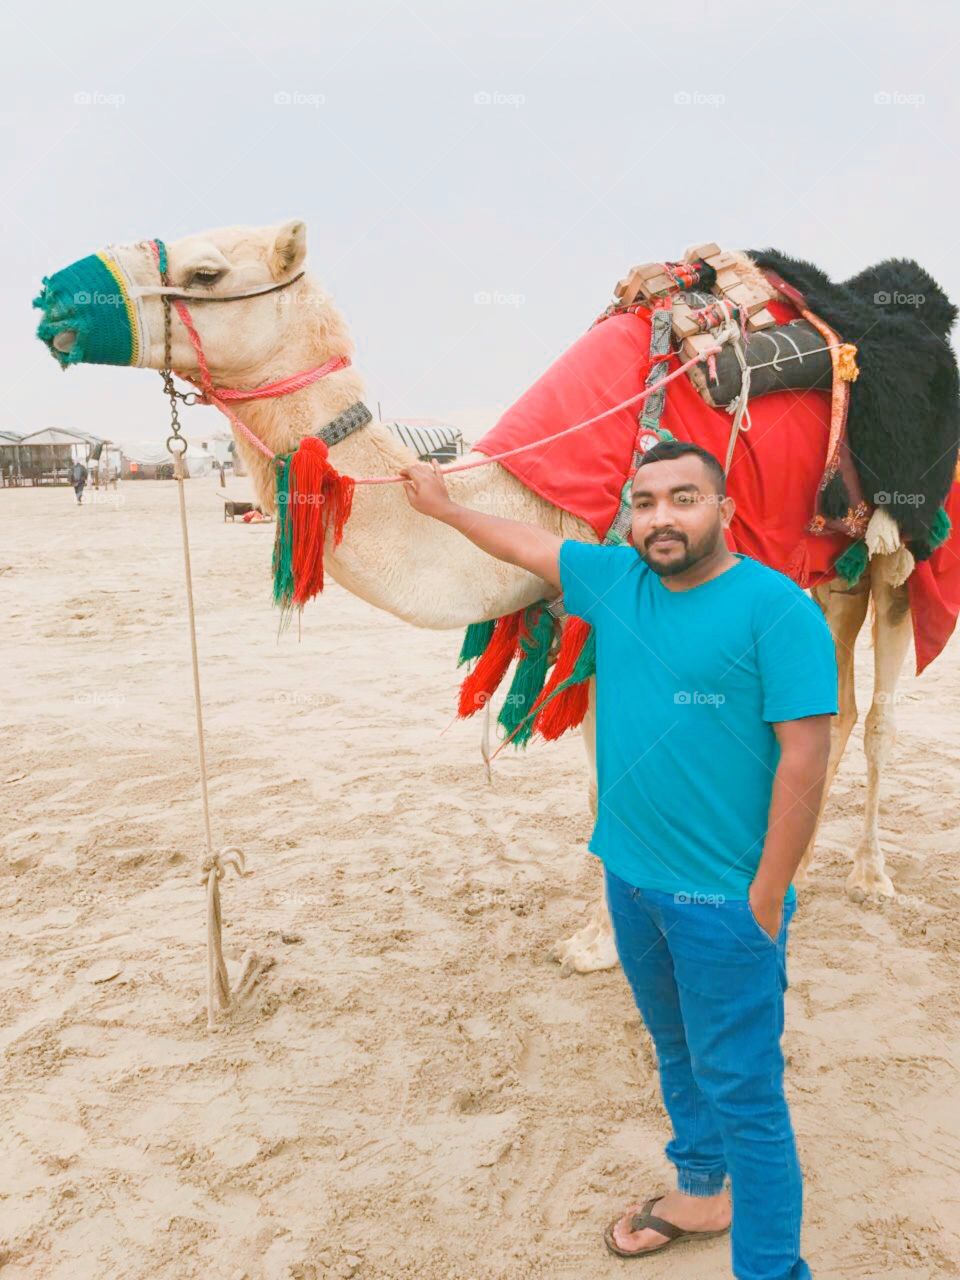 My friend with camel on outing at desert area. 